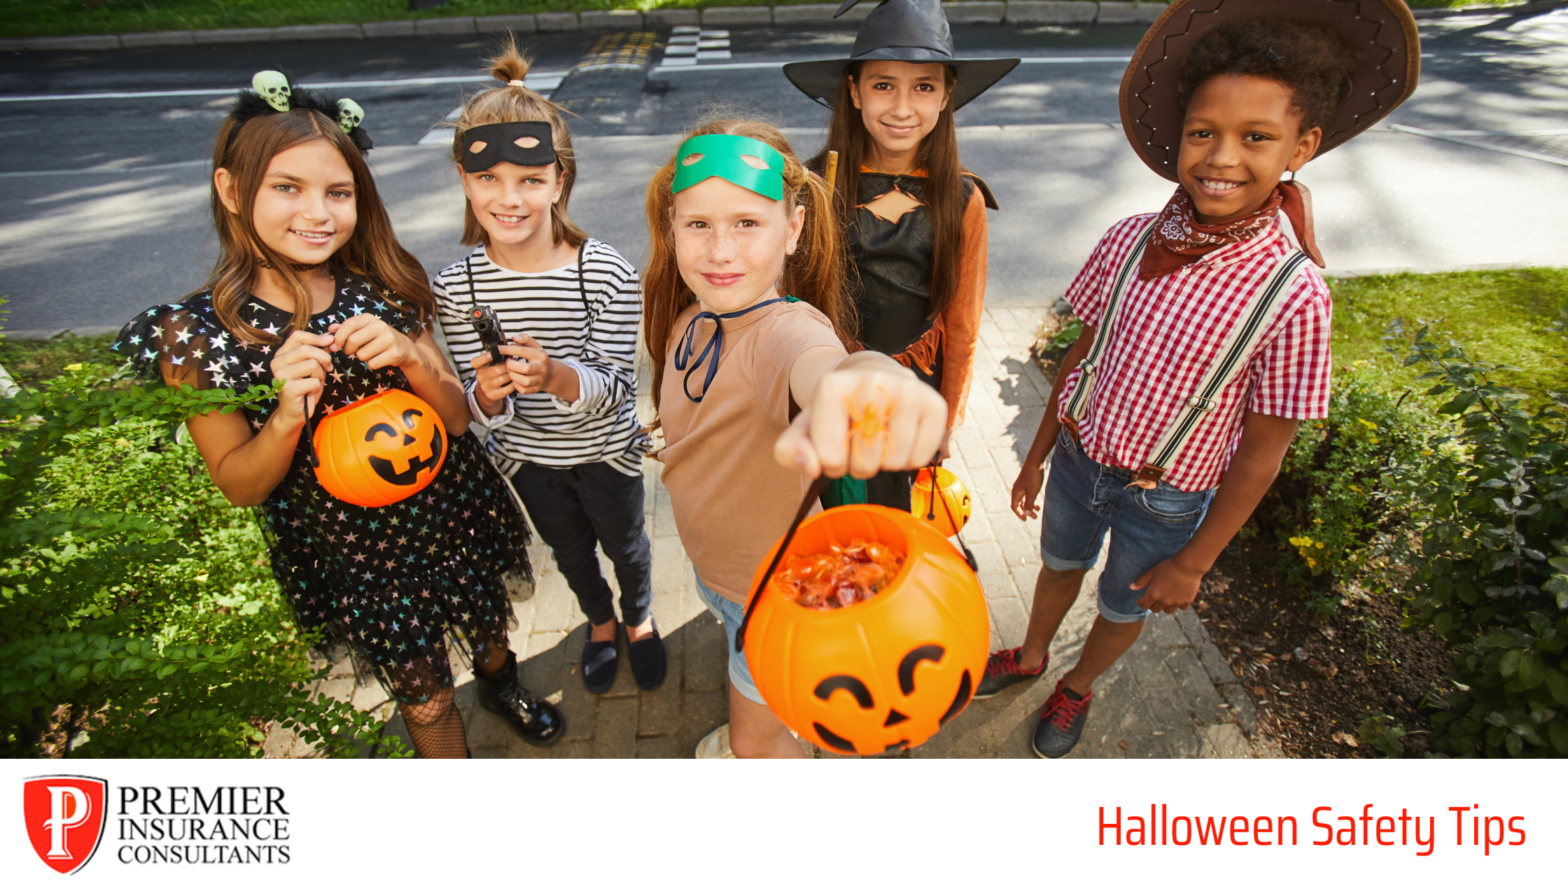 Halloween Safety Tips for Parents